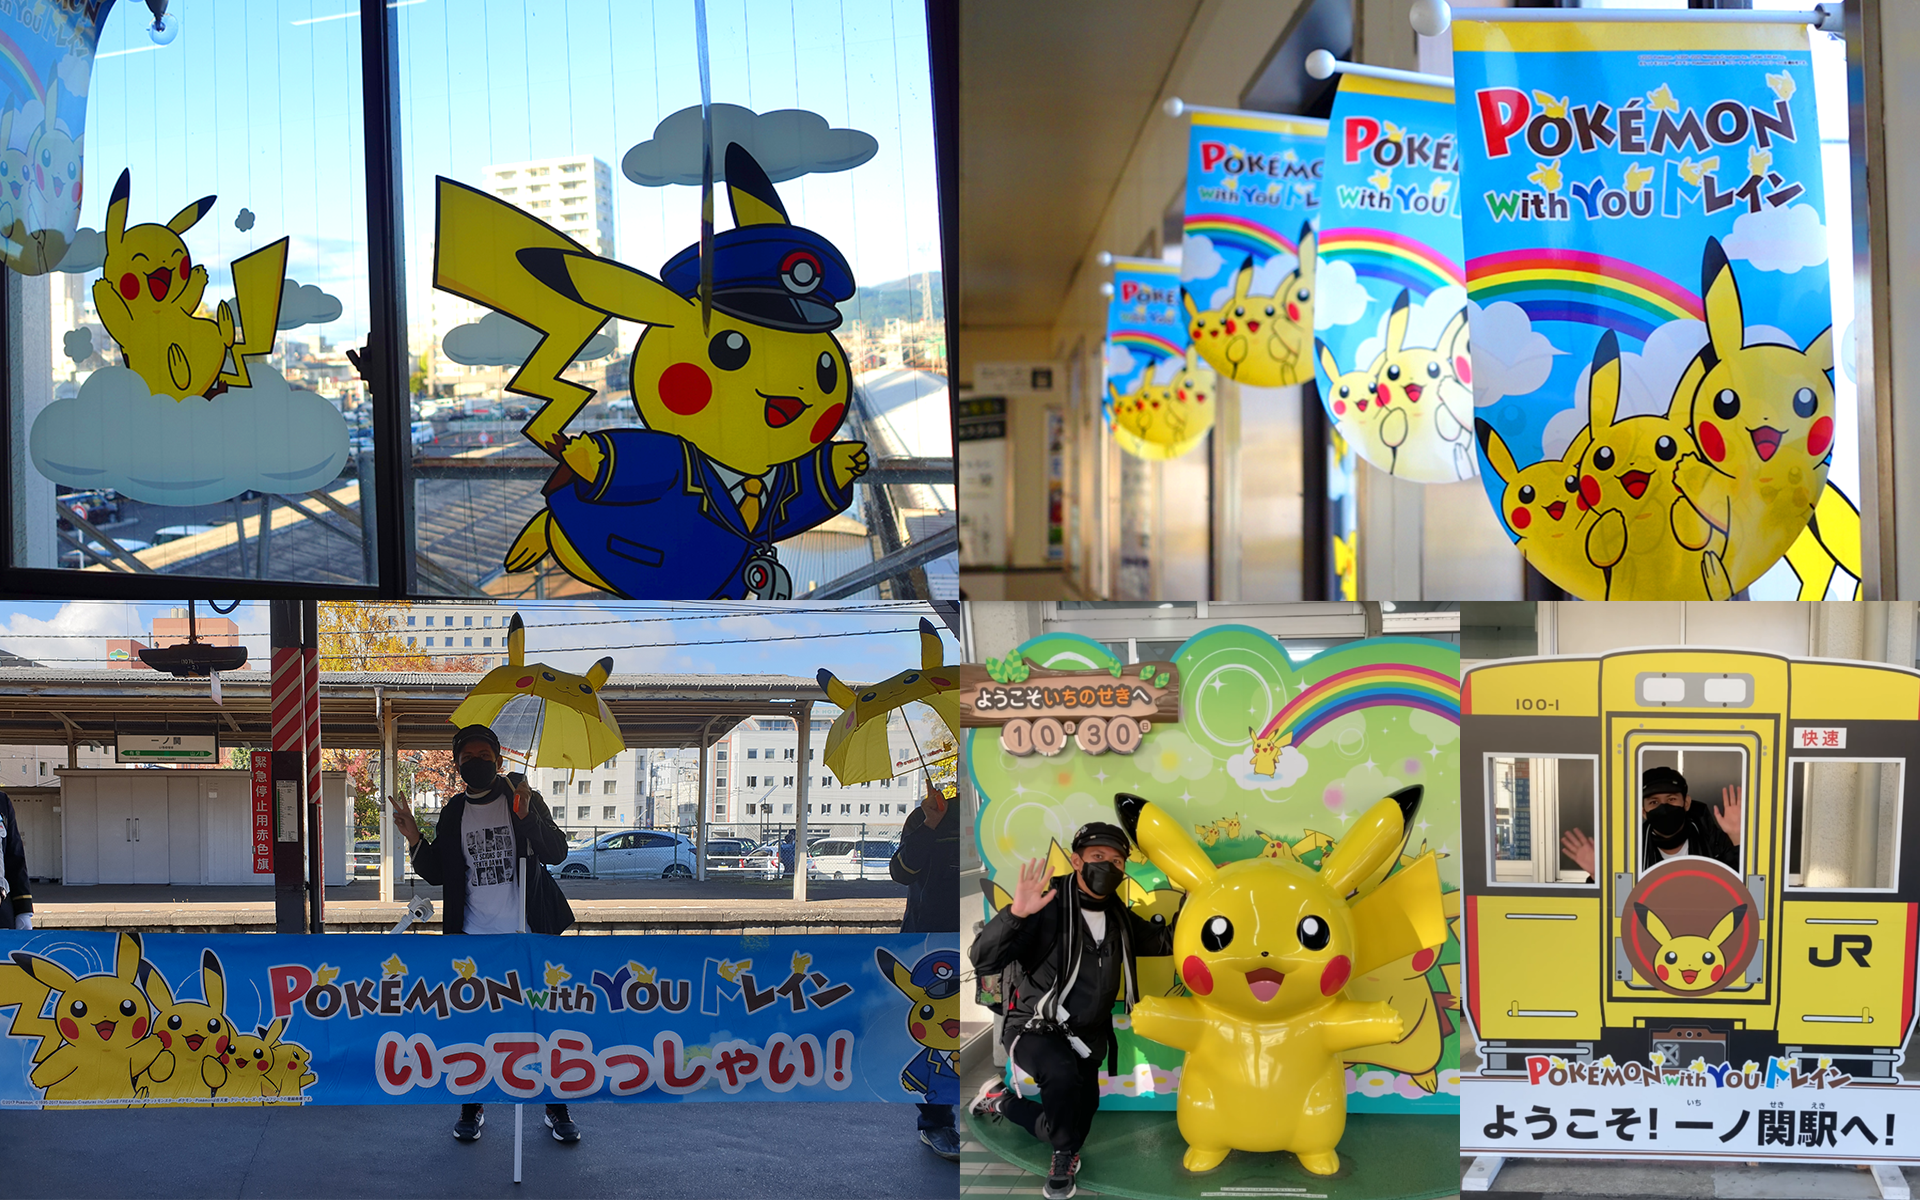 Rail Report: An electrifying ride on the POKÉMON with YOU Train 